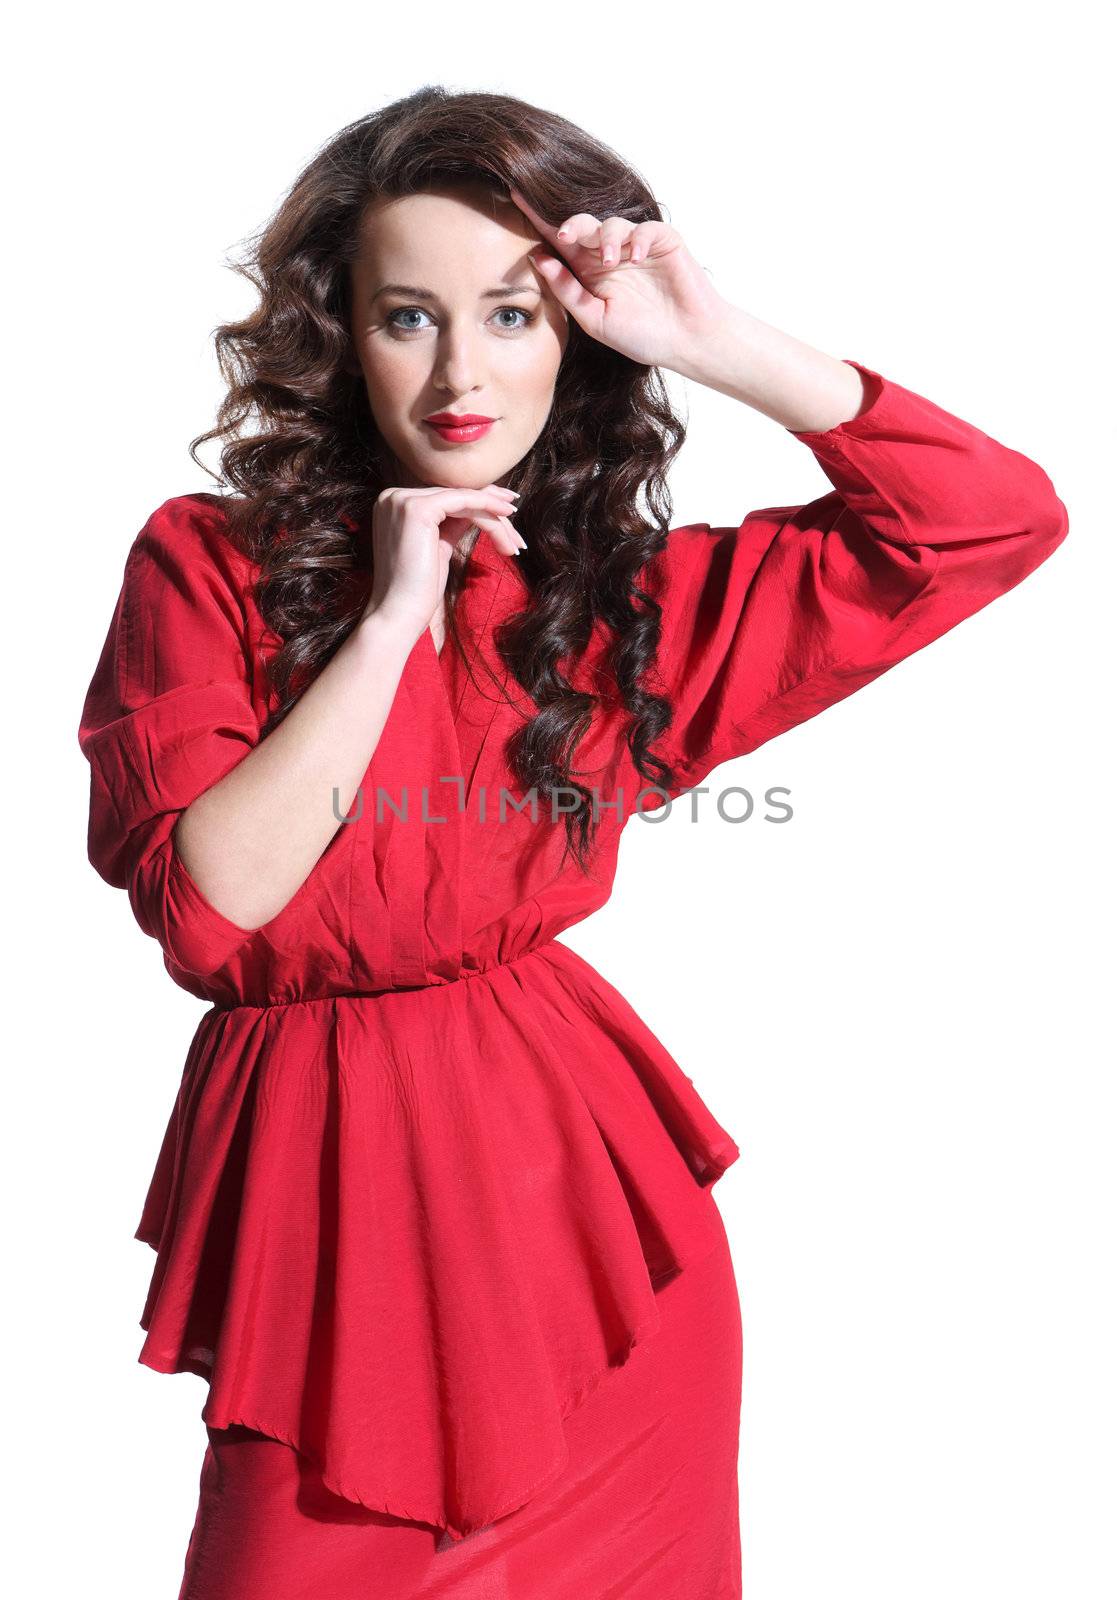 Beautiful girl in a red dress by robert_przybysz